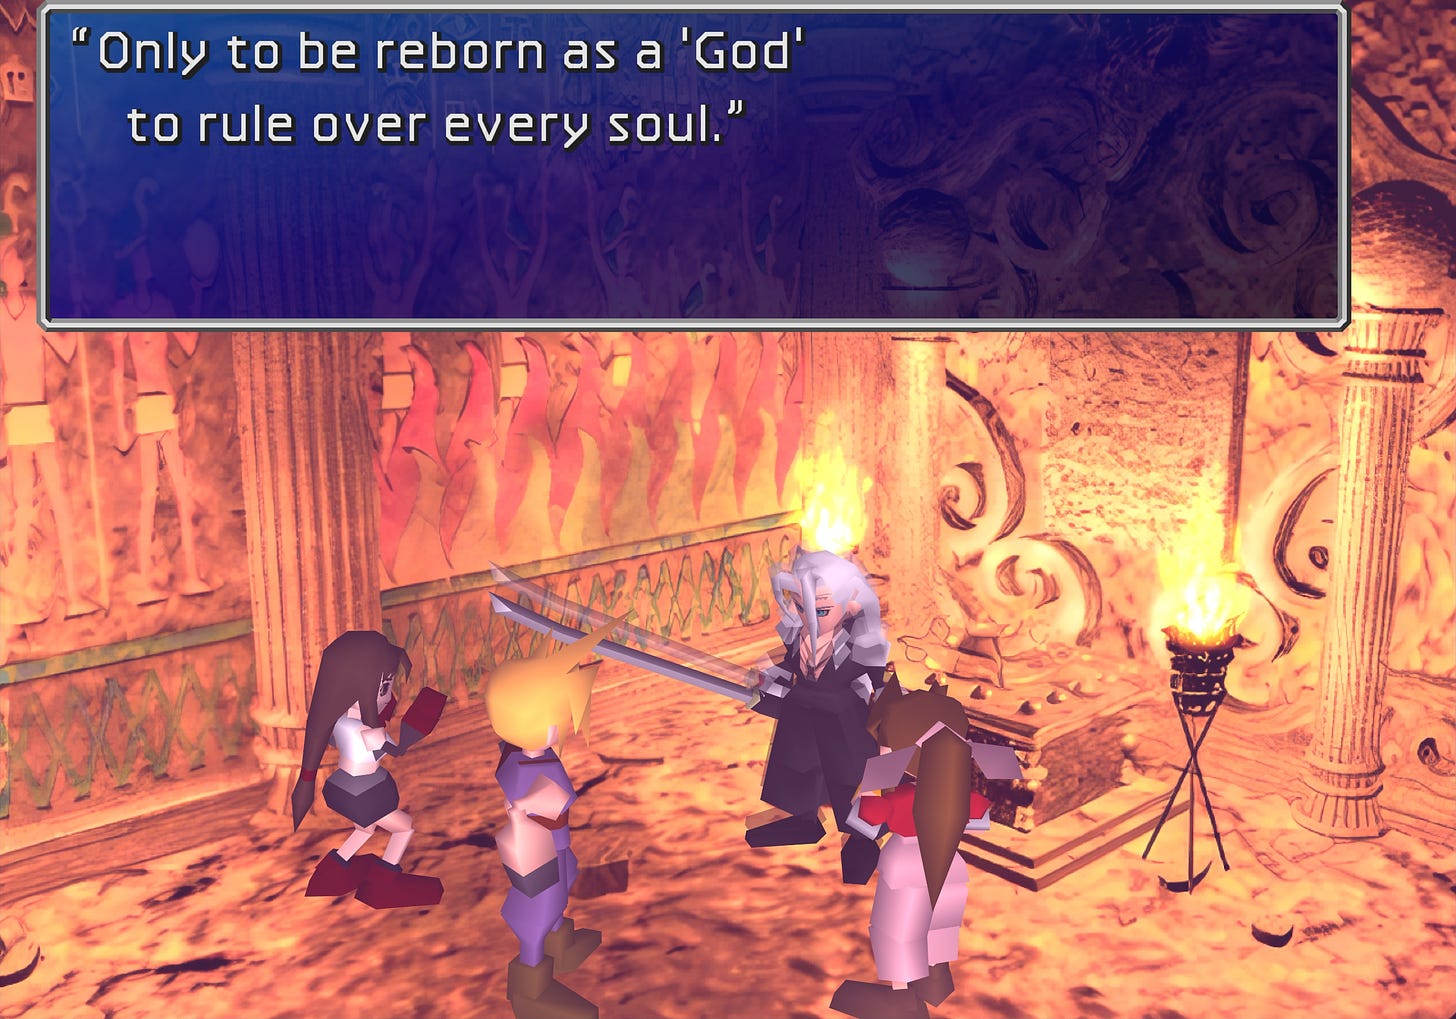 Sephiroth in the Temple of the Ancients: "Only to be reborn as a 'God' to rule over every soul."